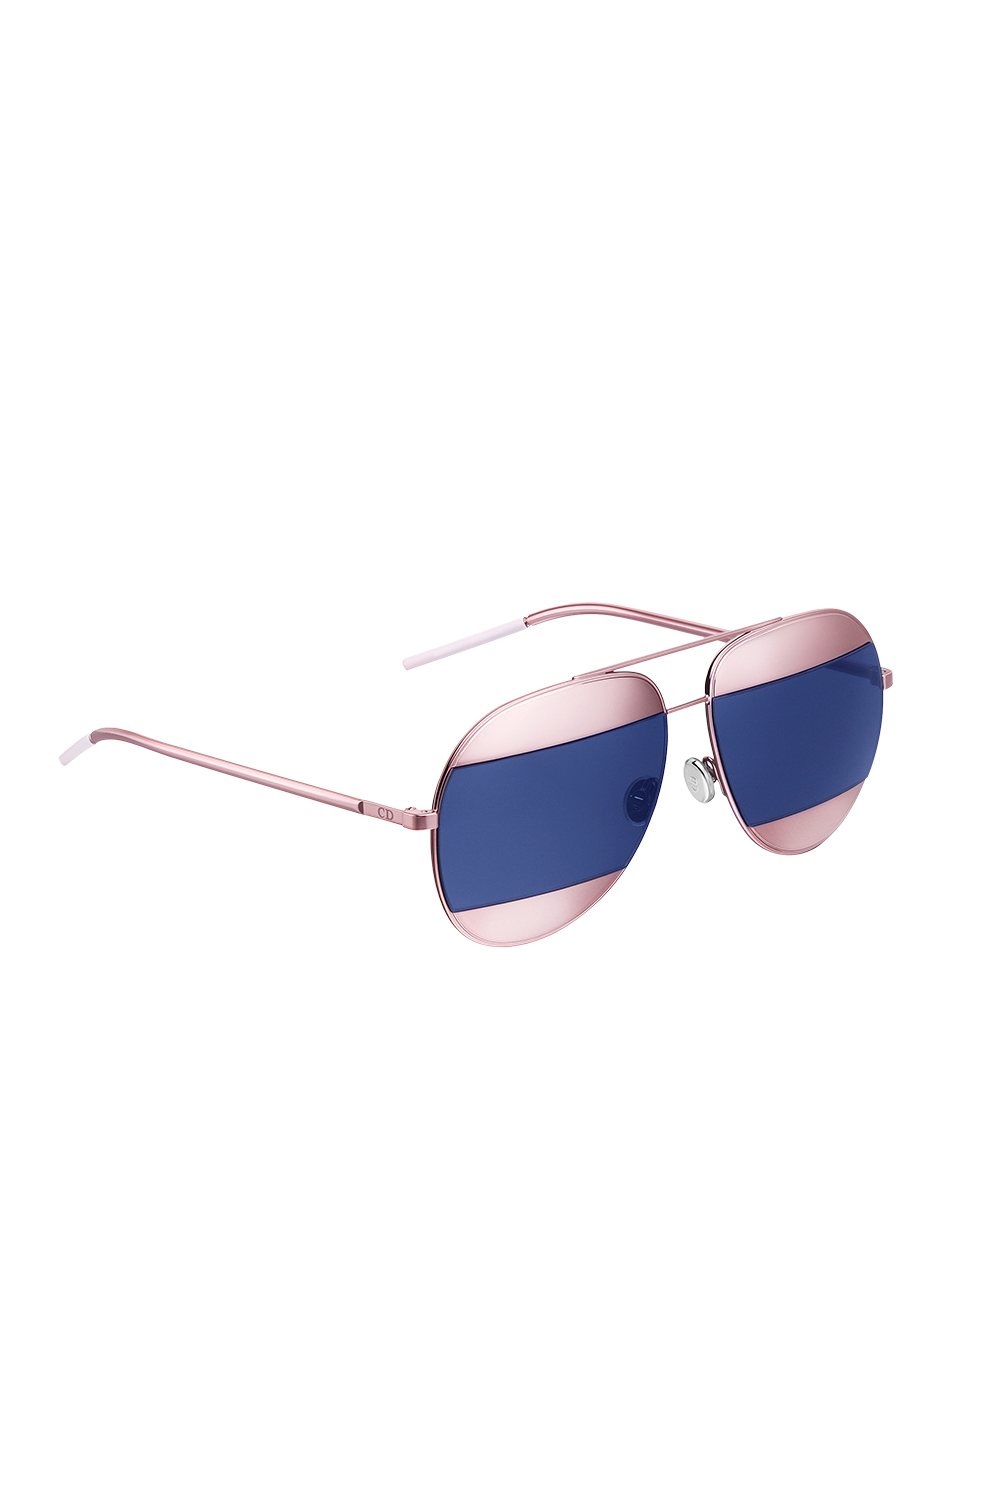 Sunglasses, $860, by Christian Dior.